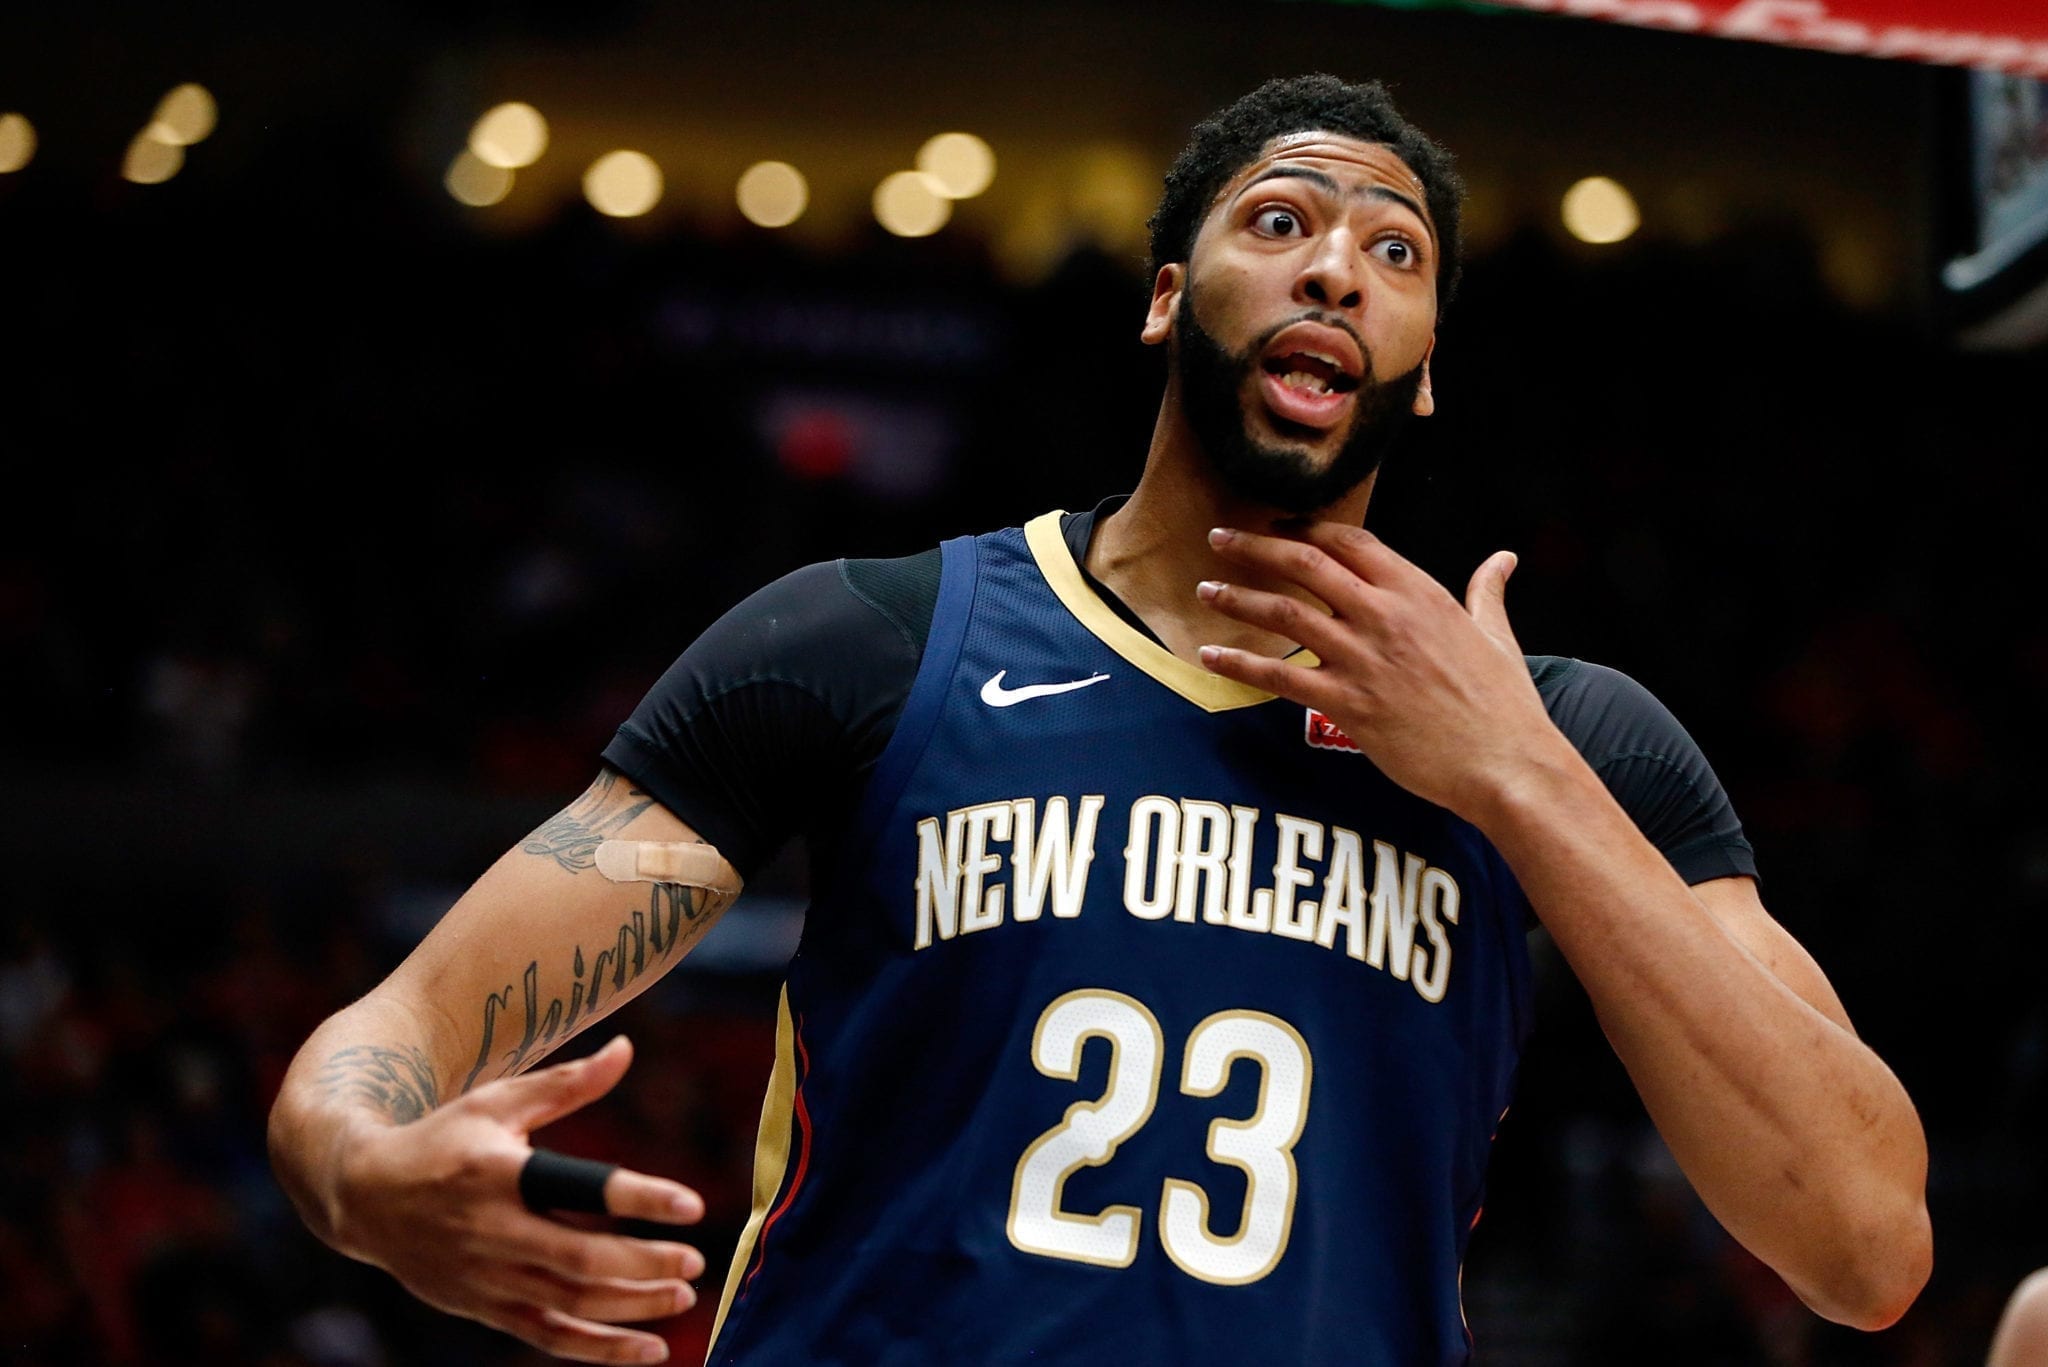 PORTLAND, OR - APRIL 17: Anthony Davis #23 of the New Orleans Pelicans complains to the official against the Portland Trail Blazers during Game One of the Western Conference Quarterfinals during the 2018 NBA Playoffs at Moda Center on April 17, 2018 in Portland, Oregon. NOTE TO USER: User expressly acknowledges and agrees that, by downloading and or using this photograph, User is consenting to the terms and conditions of the Getty Images License Agreement. (Photo by Jonathan Ferrey/Getty Images)